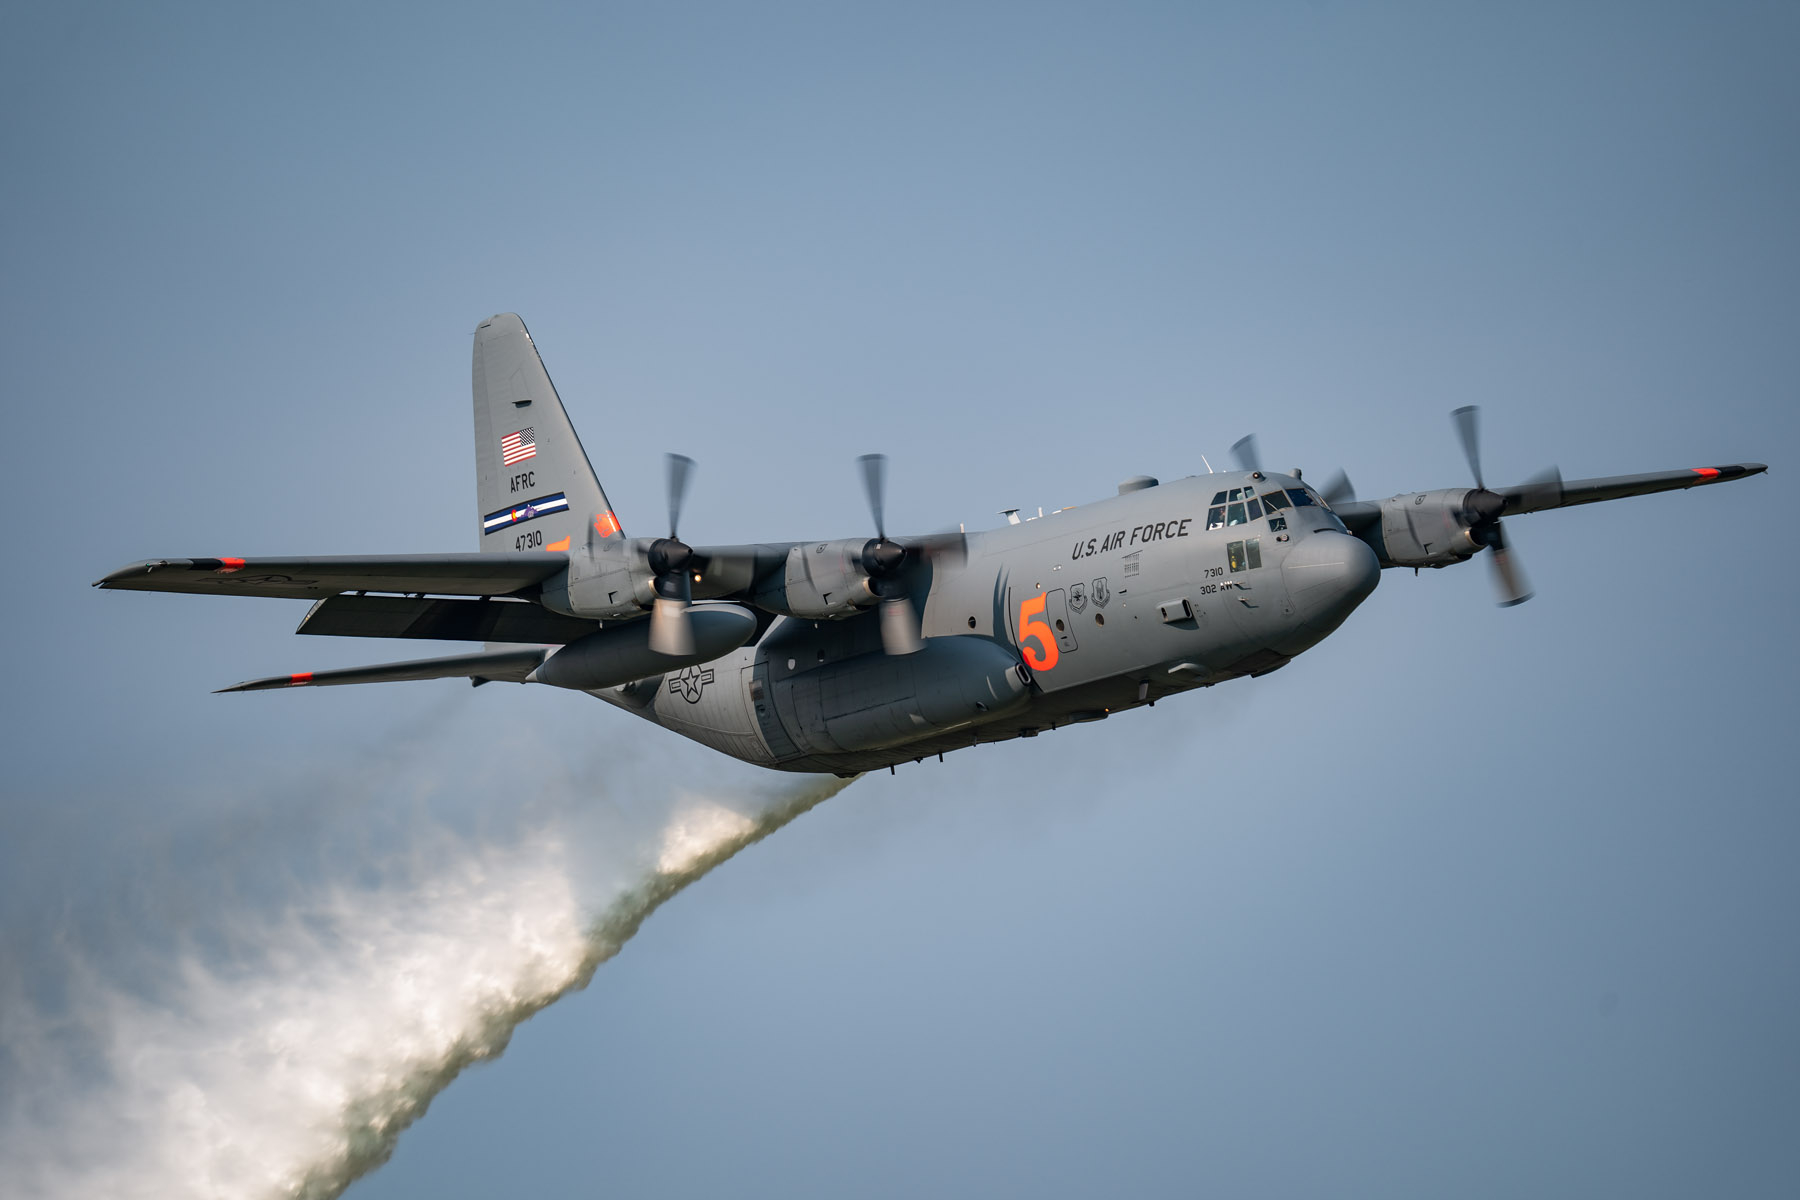 C-130 Fire Fighter